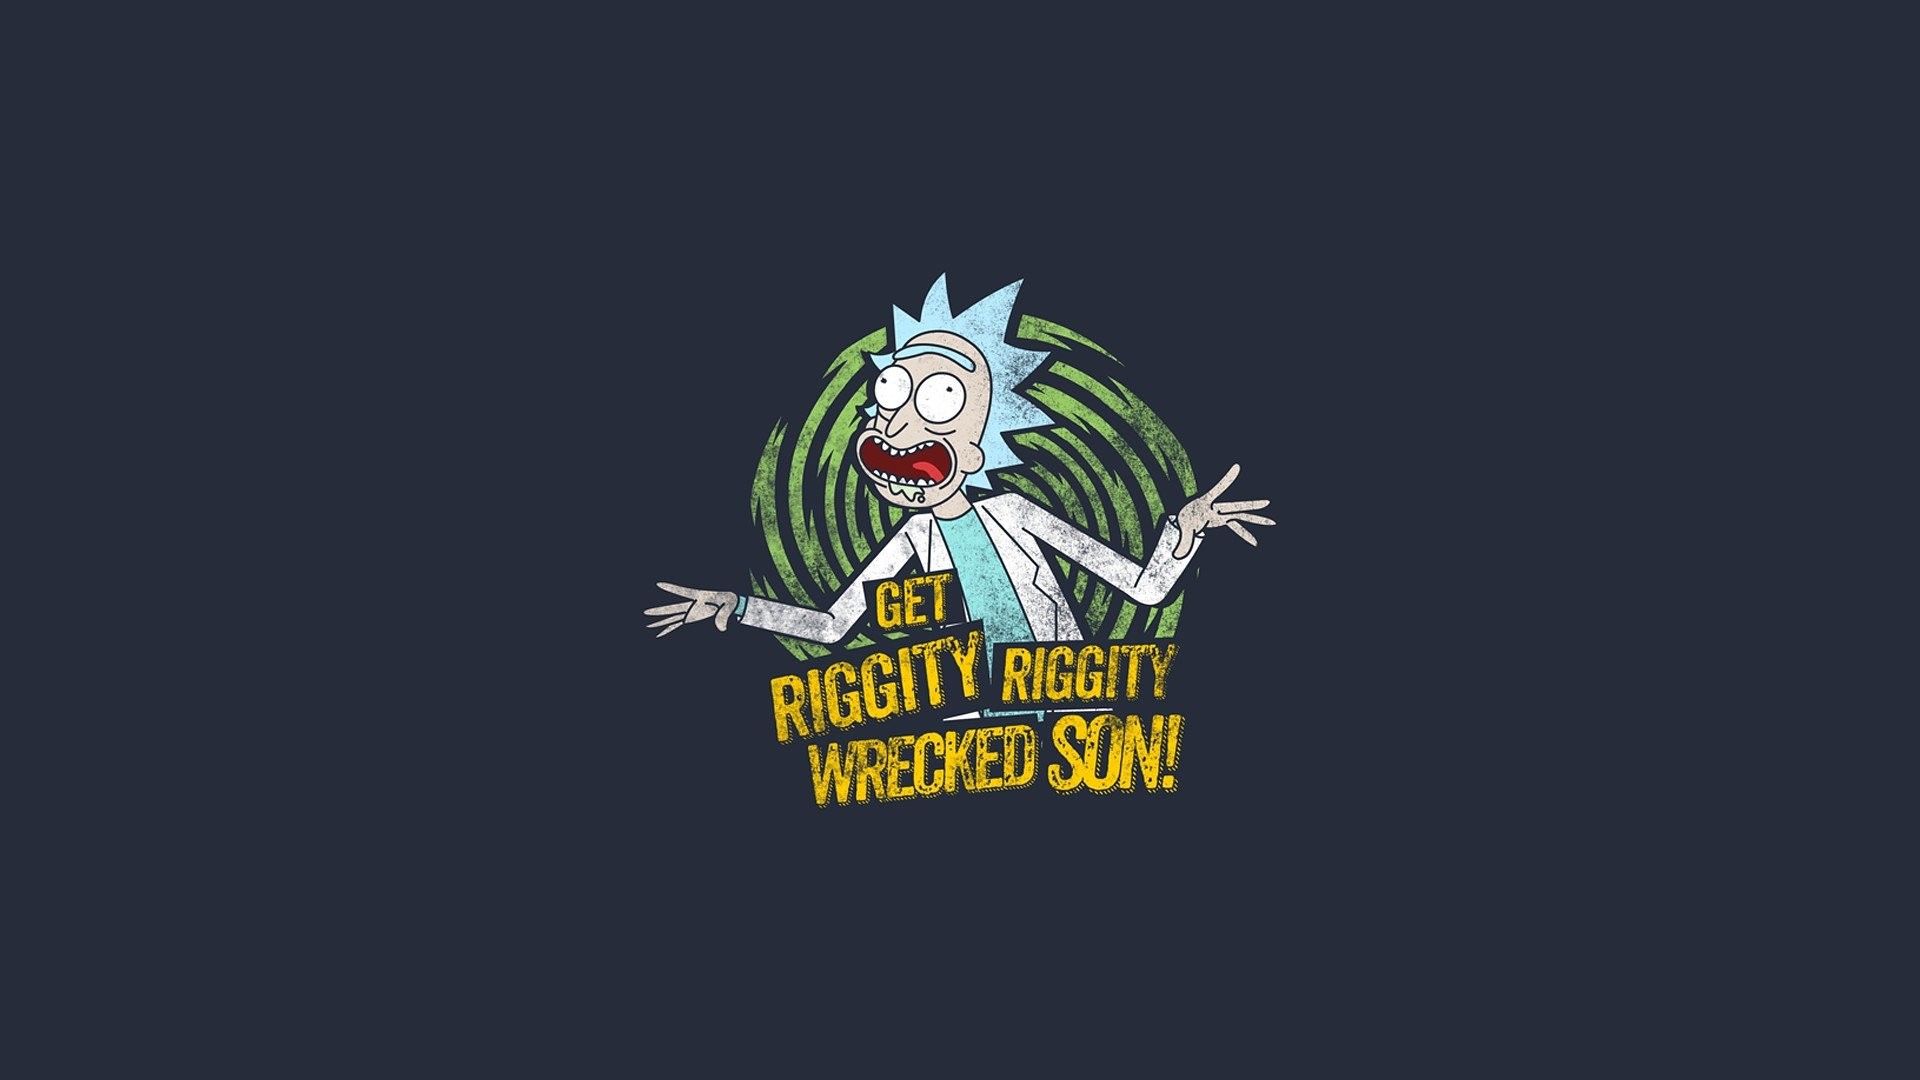 Dope Wallpaper HD Data Src Full Size Dope Nike Wallpaper And Morty Cover